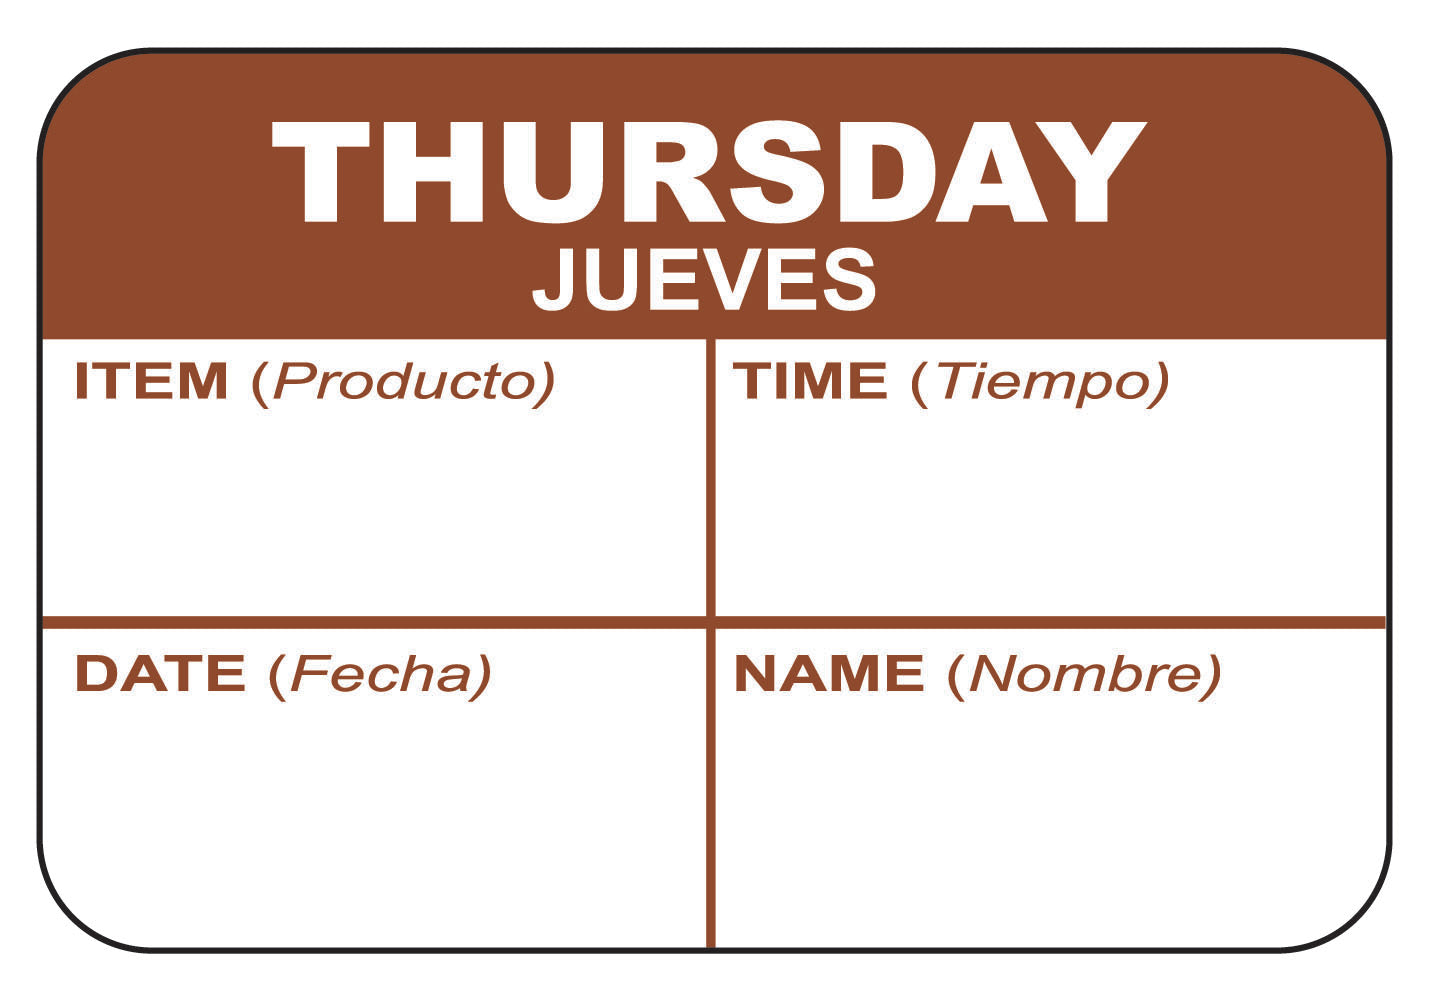 Thursday - Jueves 1" x 1.5" Dissolvable "Quad" Day of the Week Date Label